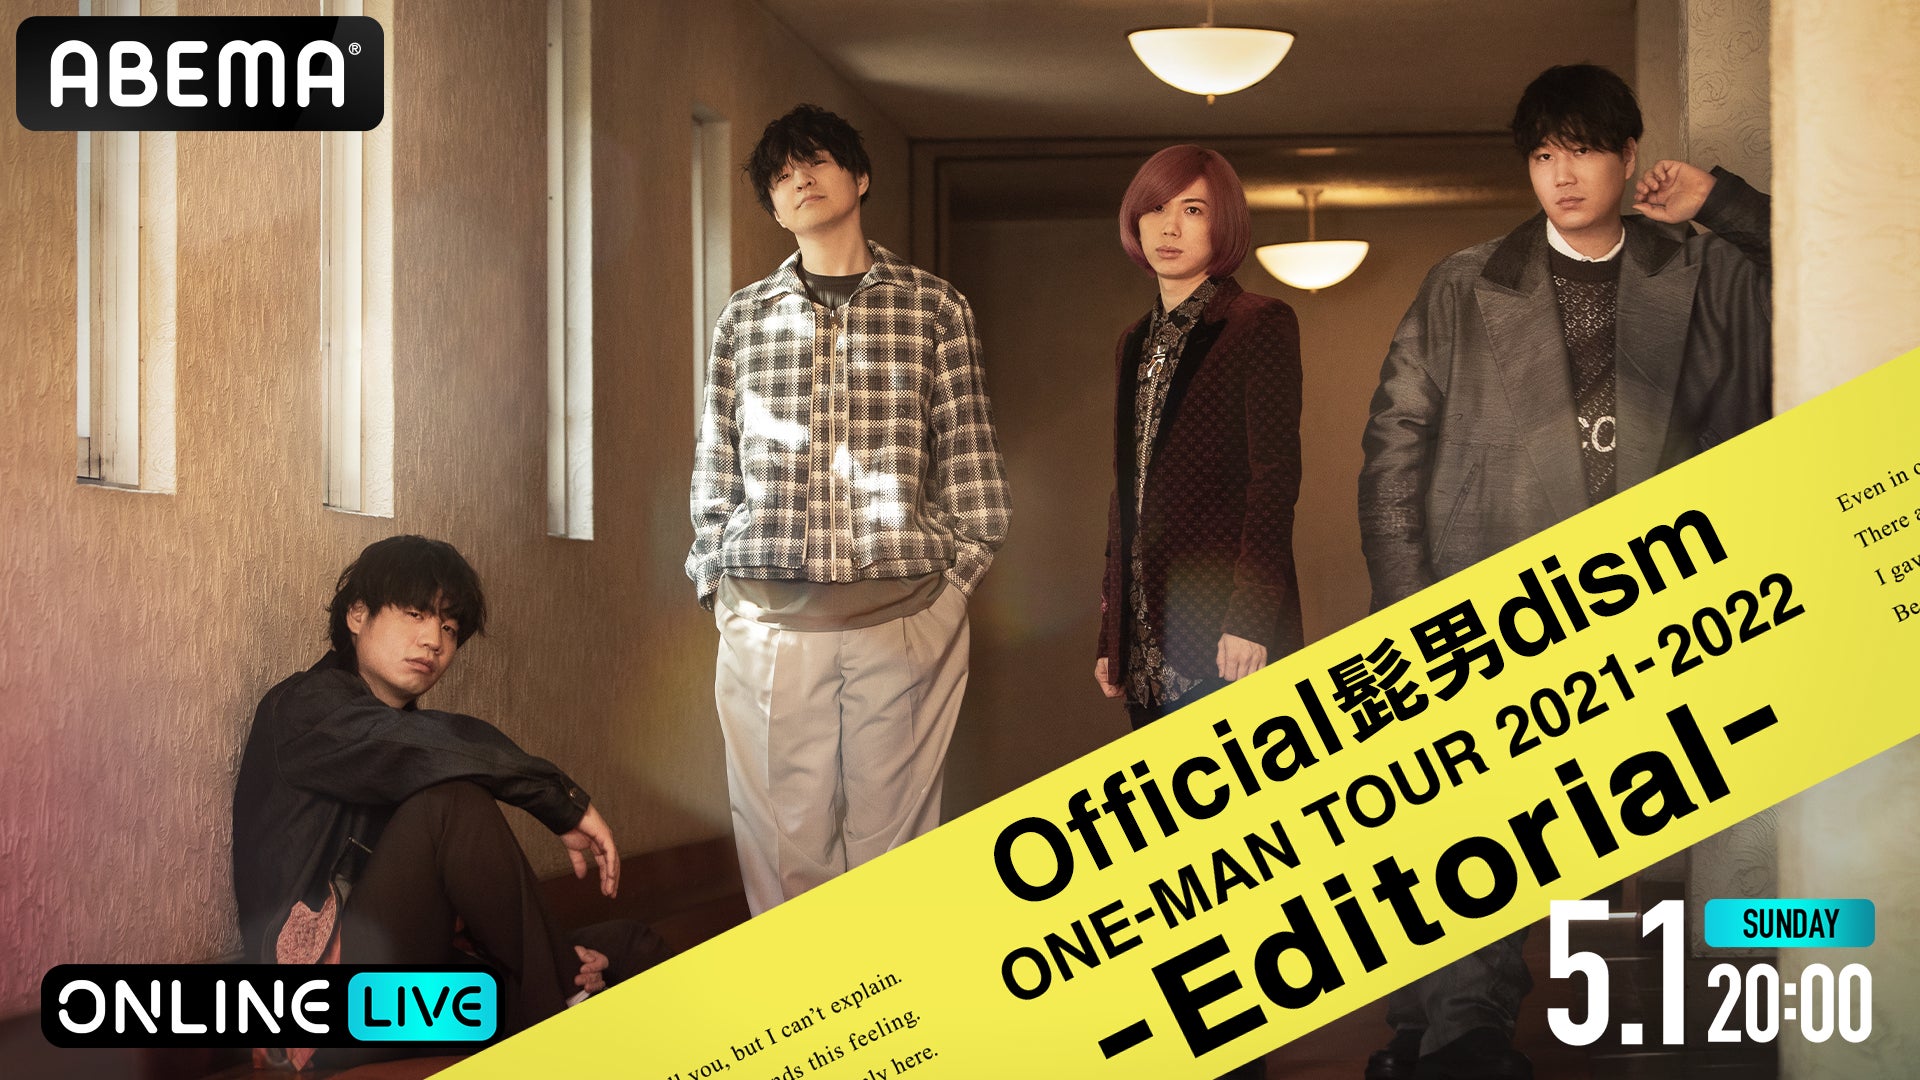 「ABEMA PPV ONLINE LIVE」にて『Official髭男dism one – man tour 2021-2022 – Editorial -』を5月1日（日）20時より配信決定